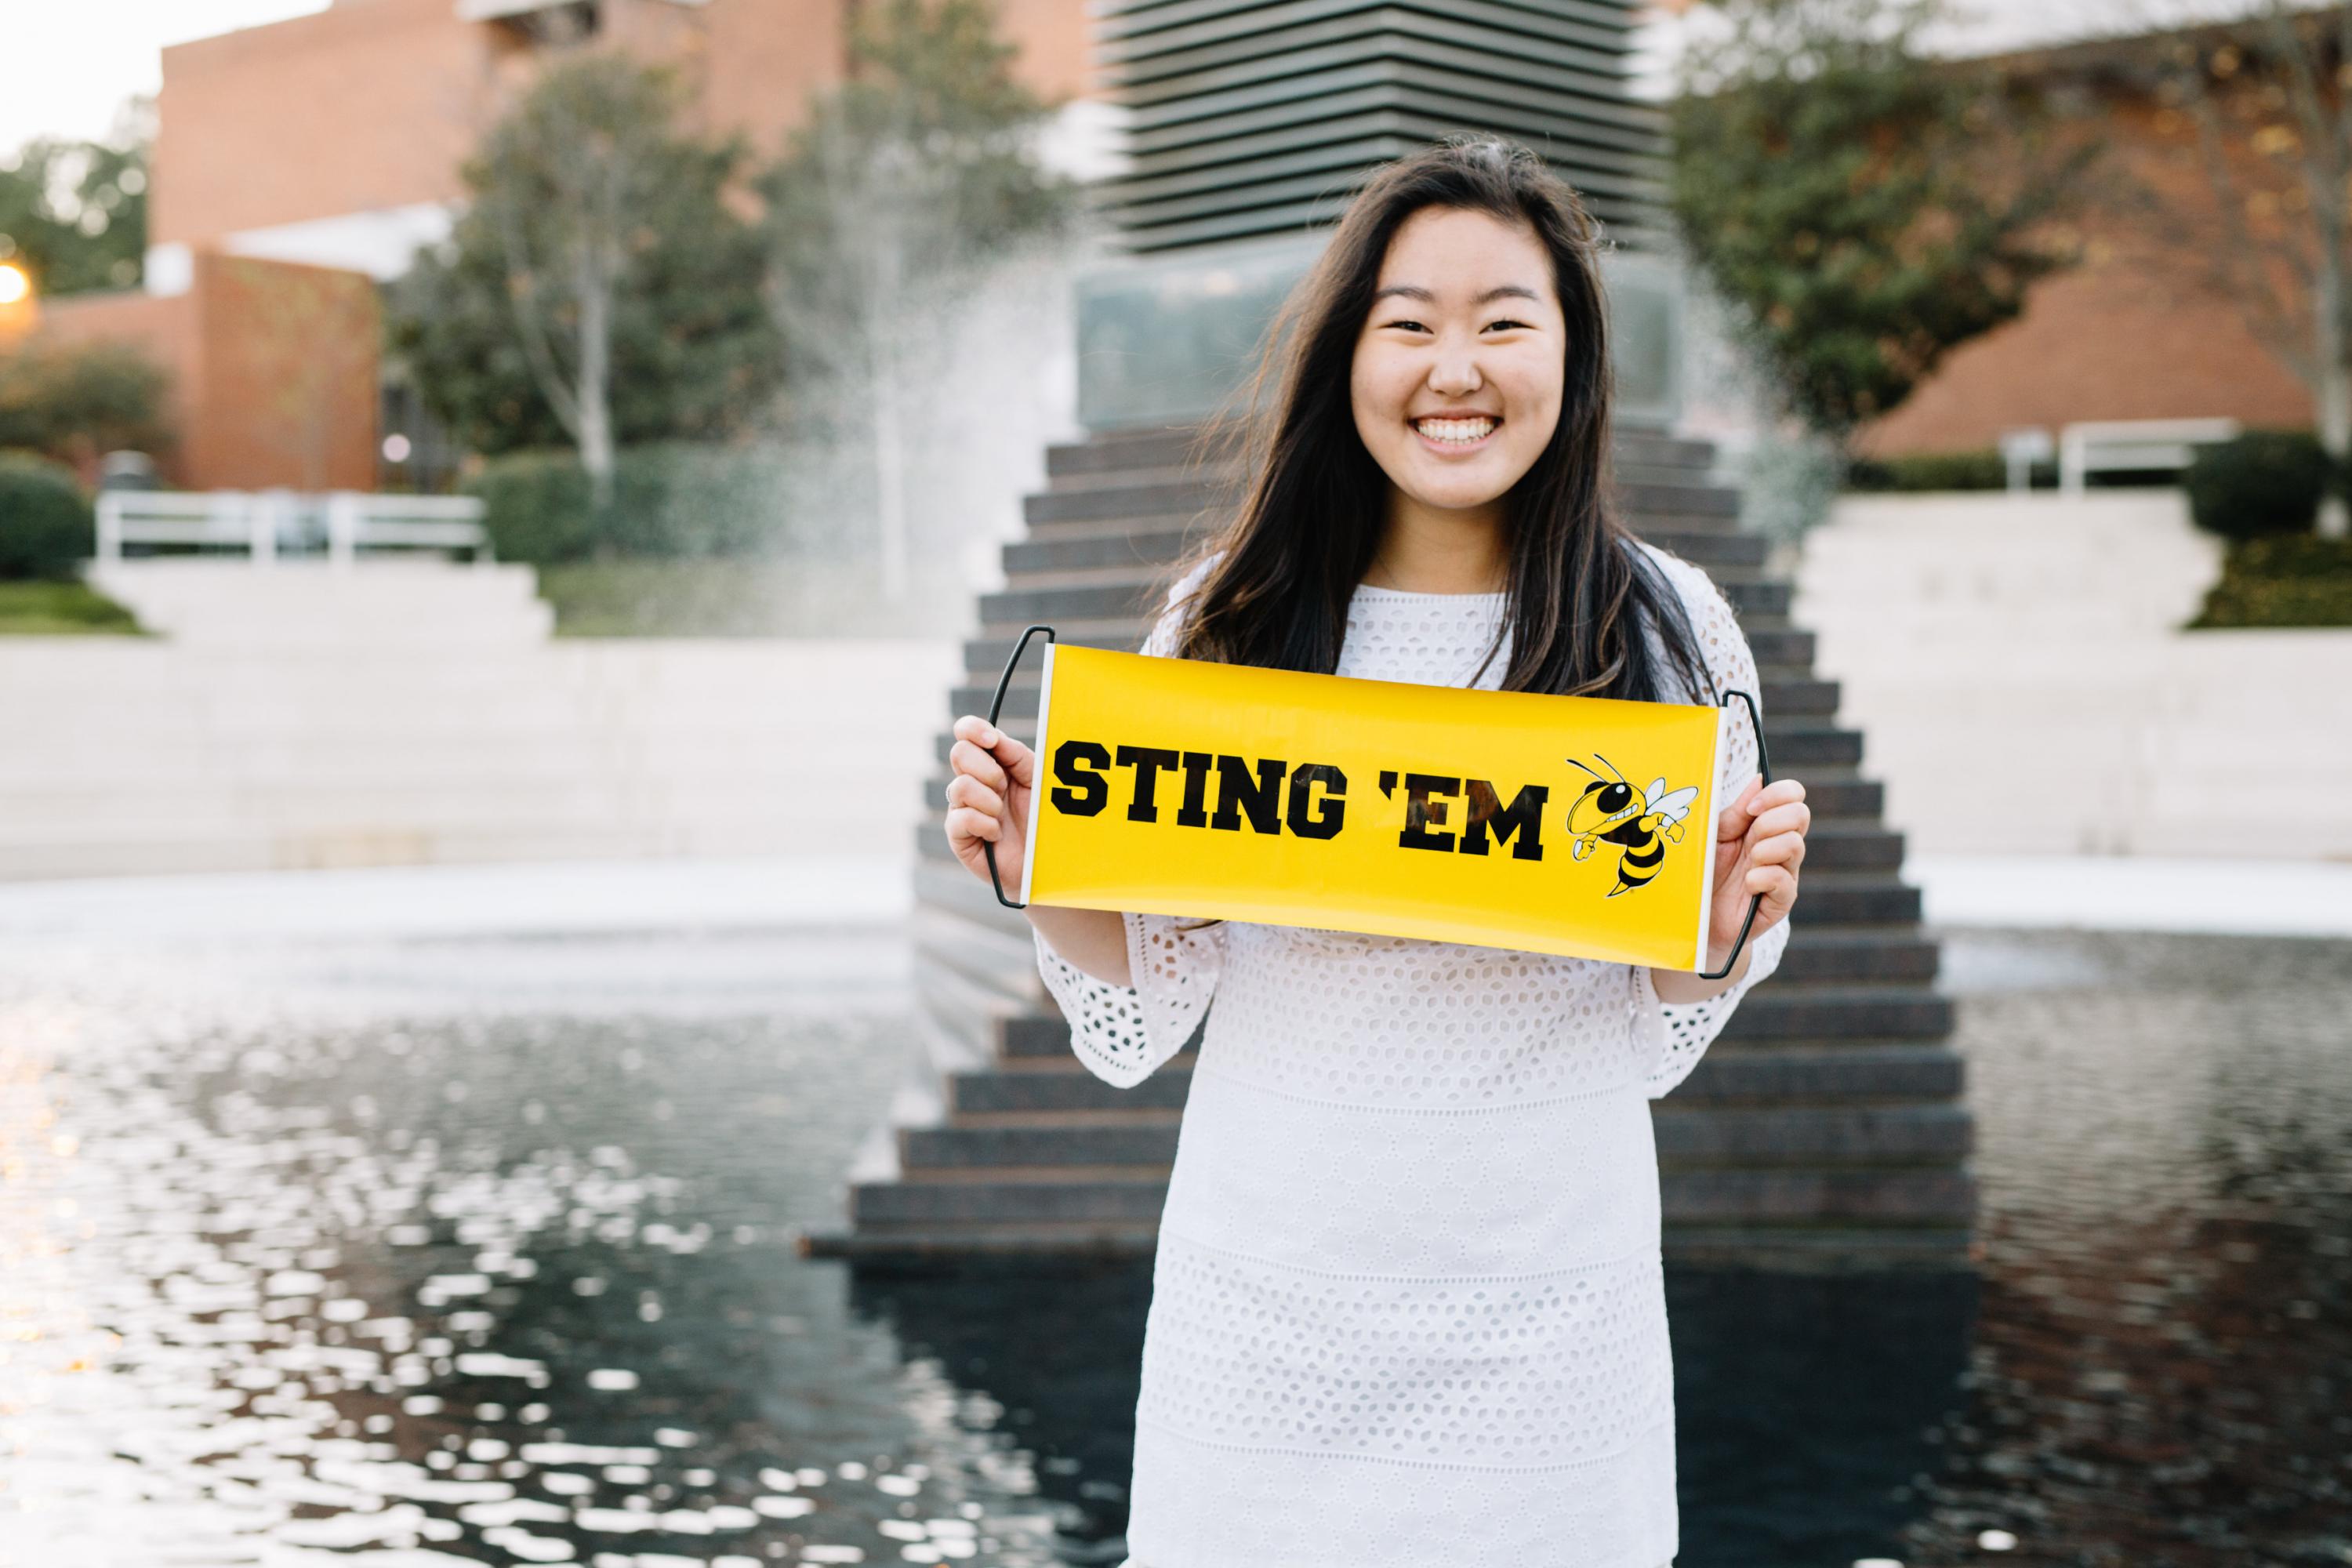 Ellen Min graduated with high honors from the nation's top ranked industrial engineering program.